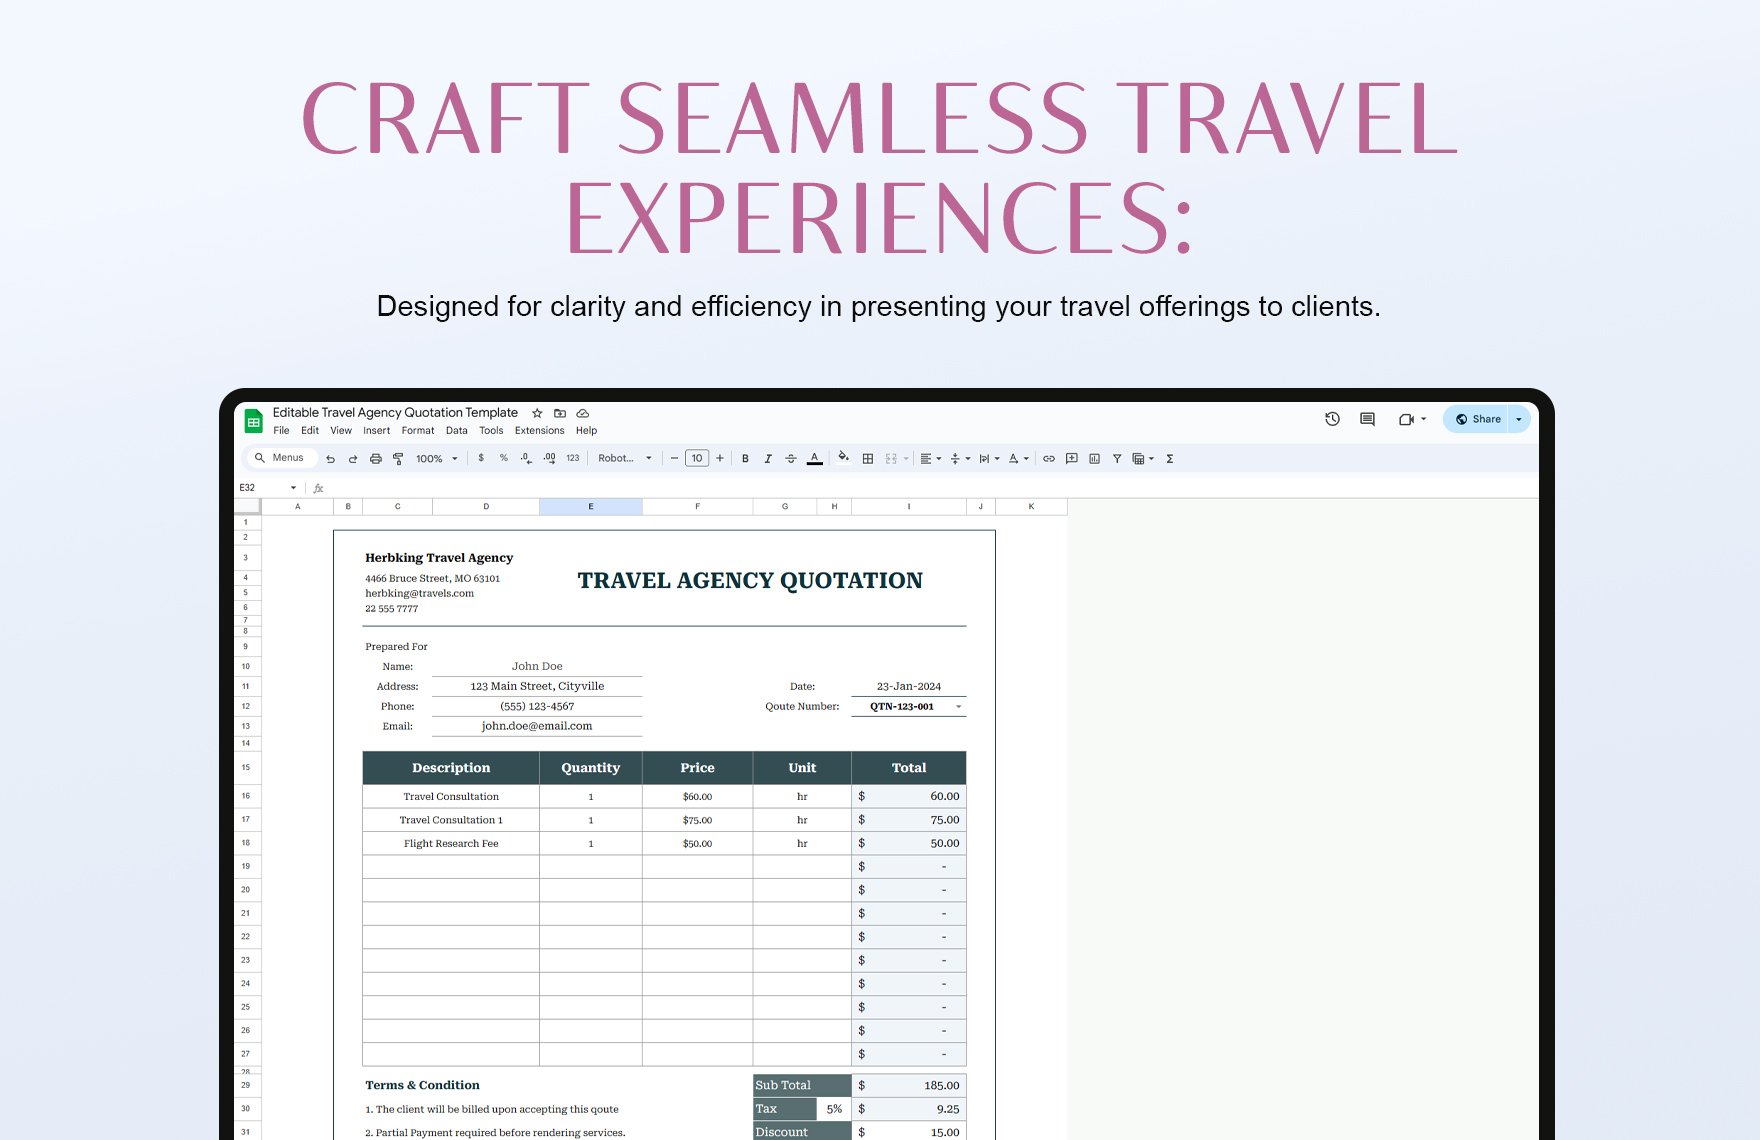 Editable Travel Agency Quotation Template